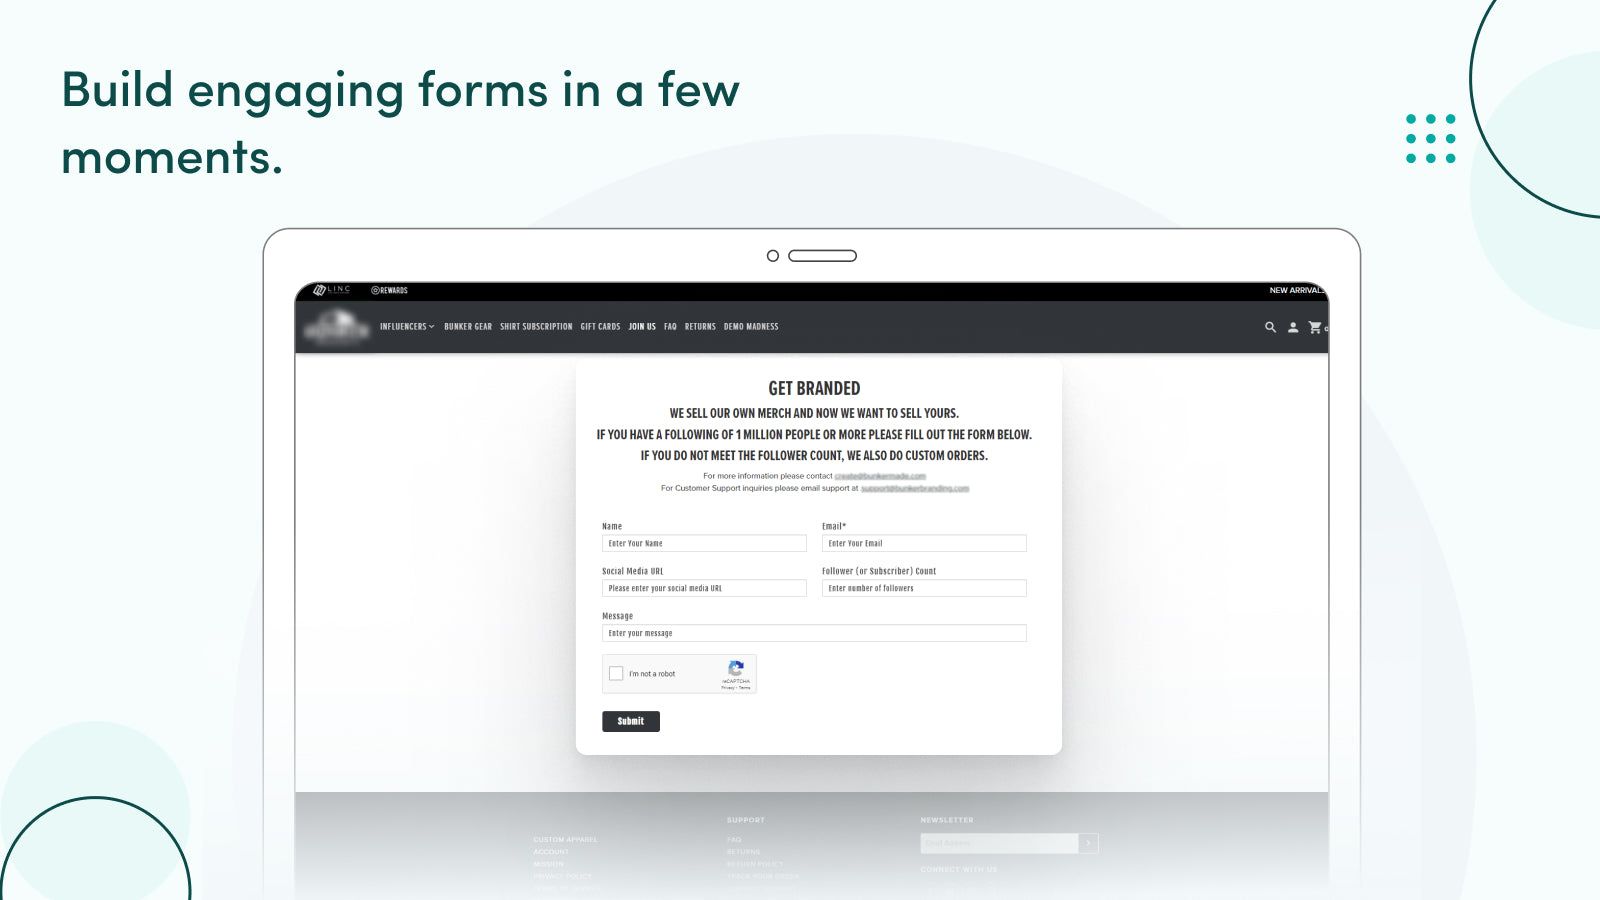 We provide simple form creation with file uploads.